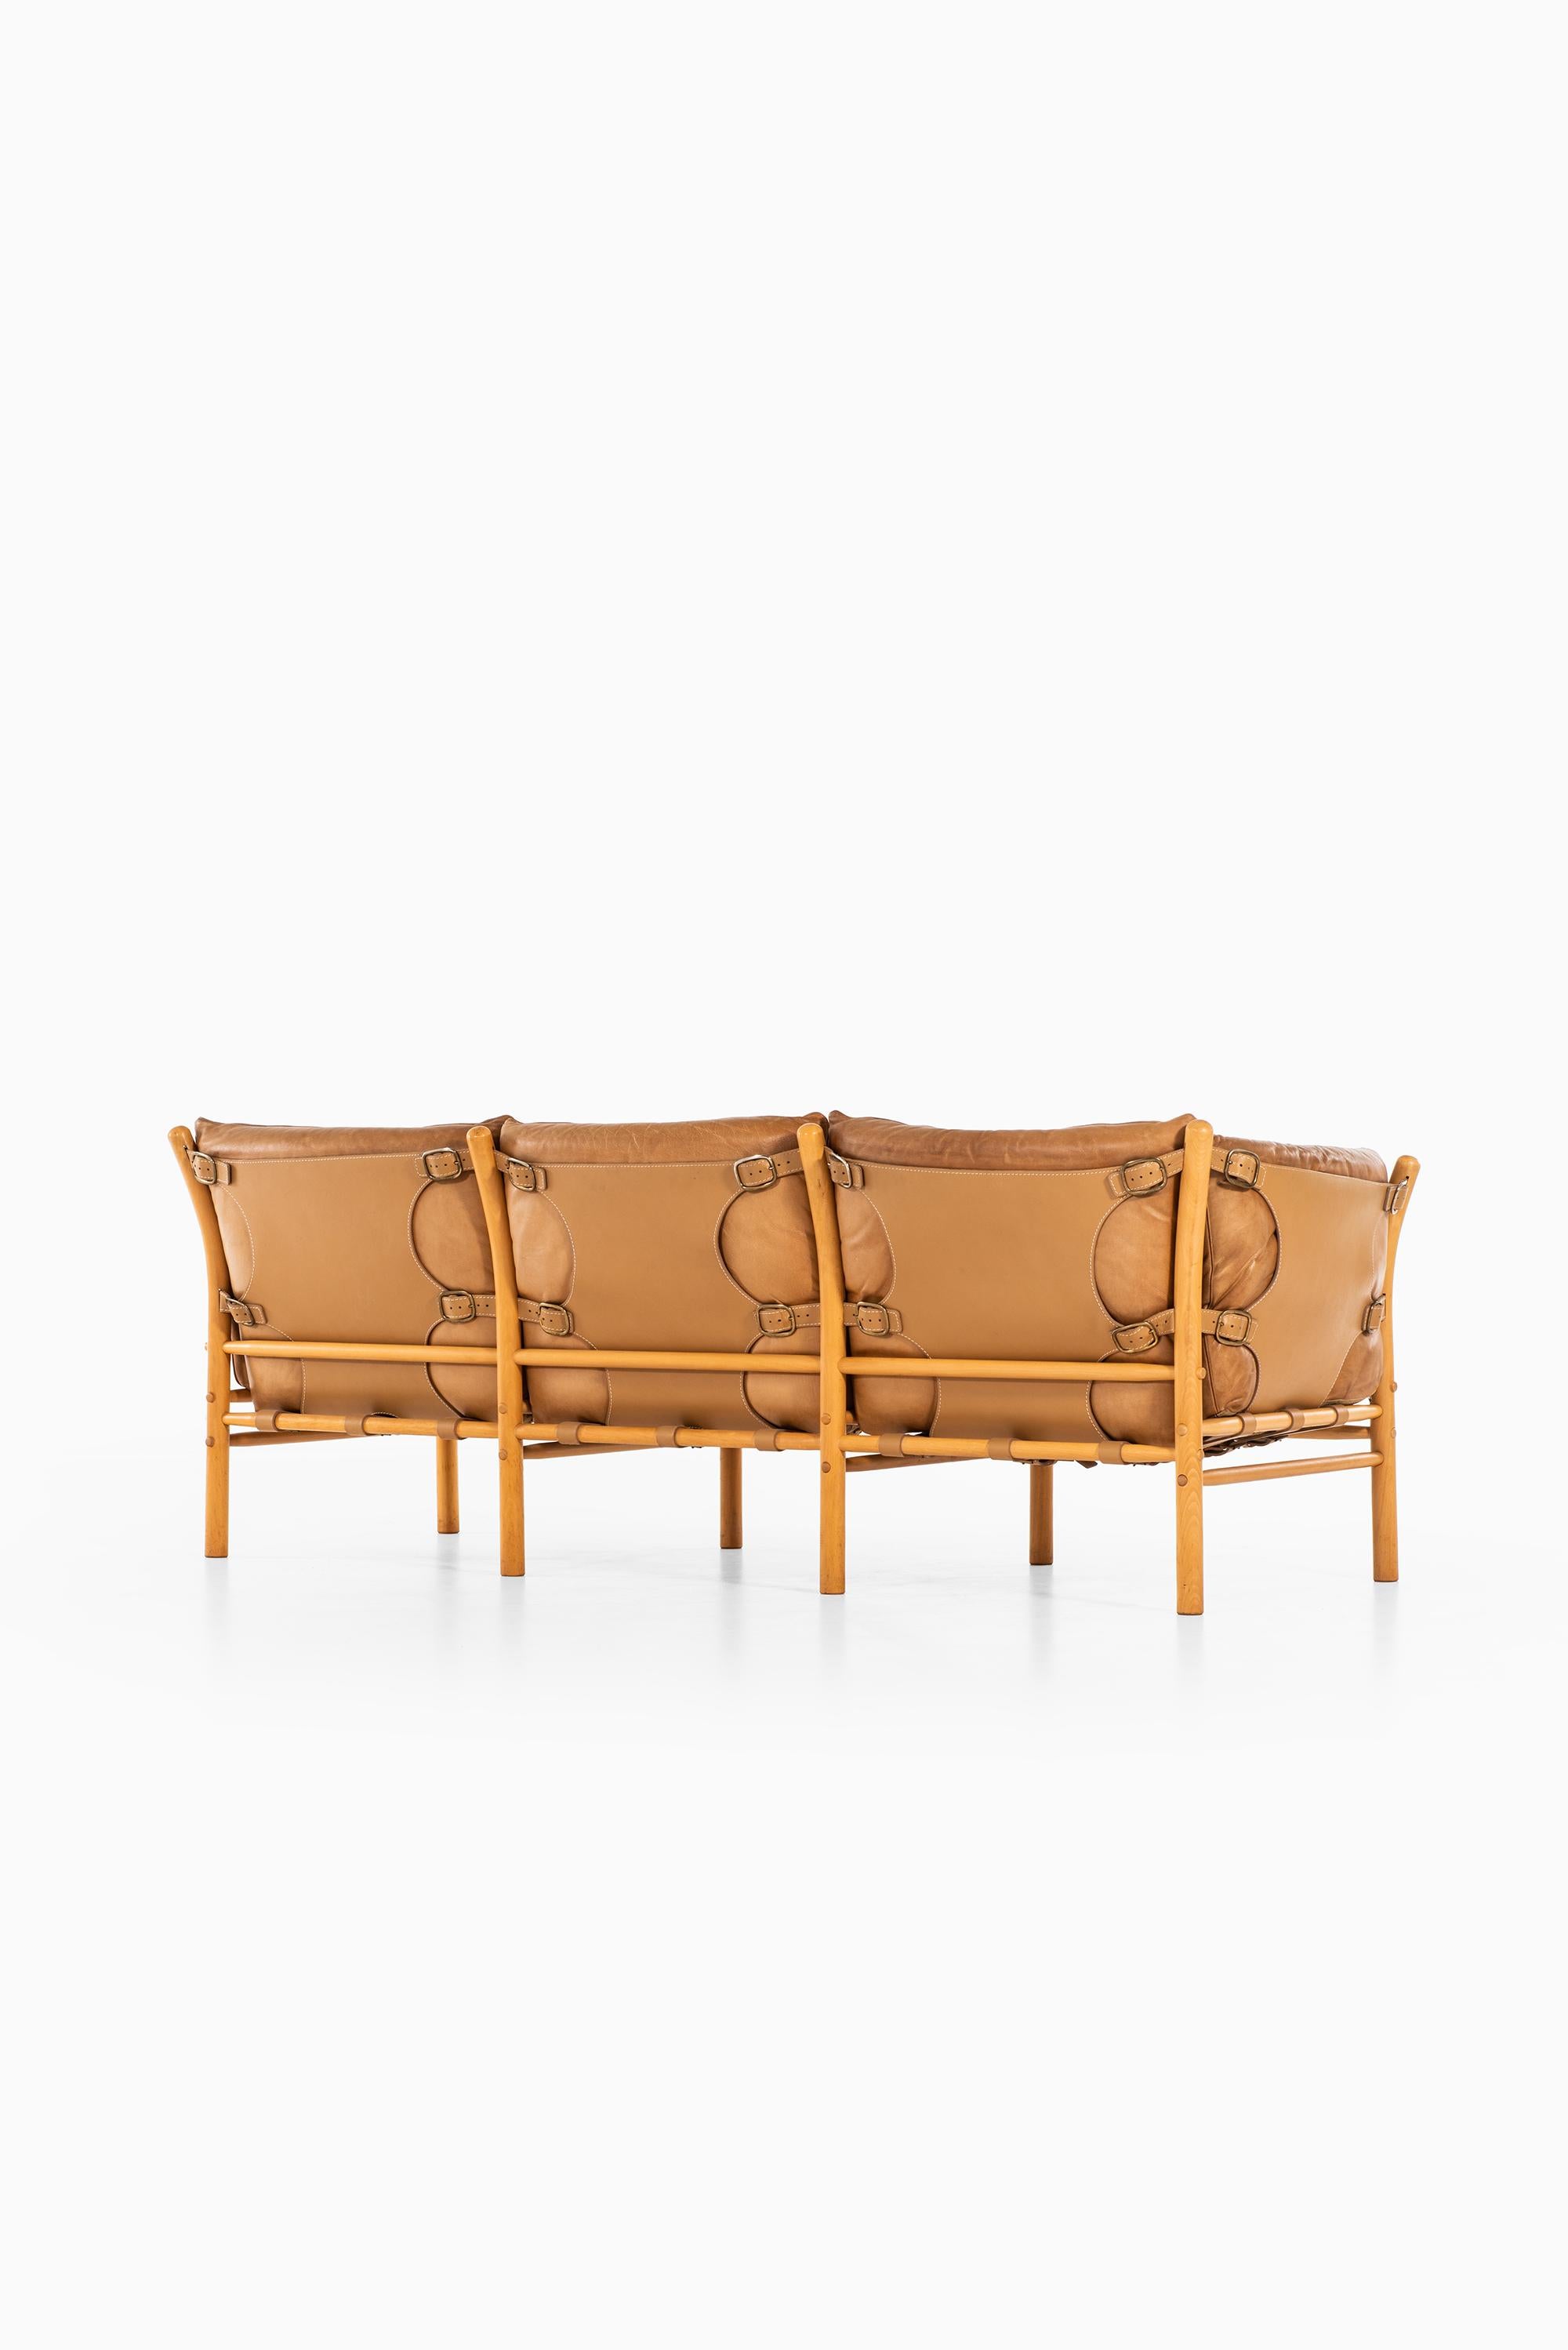 Brass Arne Norell Sofa Model Ilona Produced by Arne Norell AB in Sweden